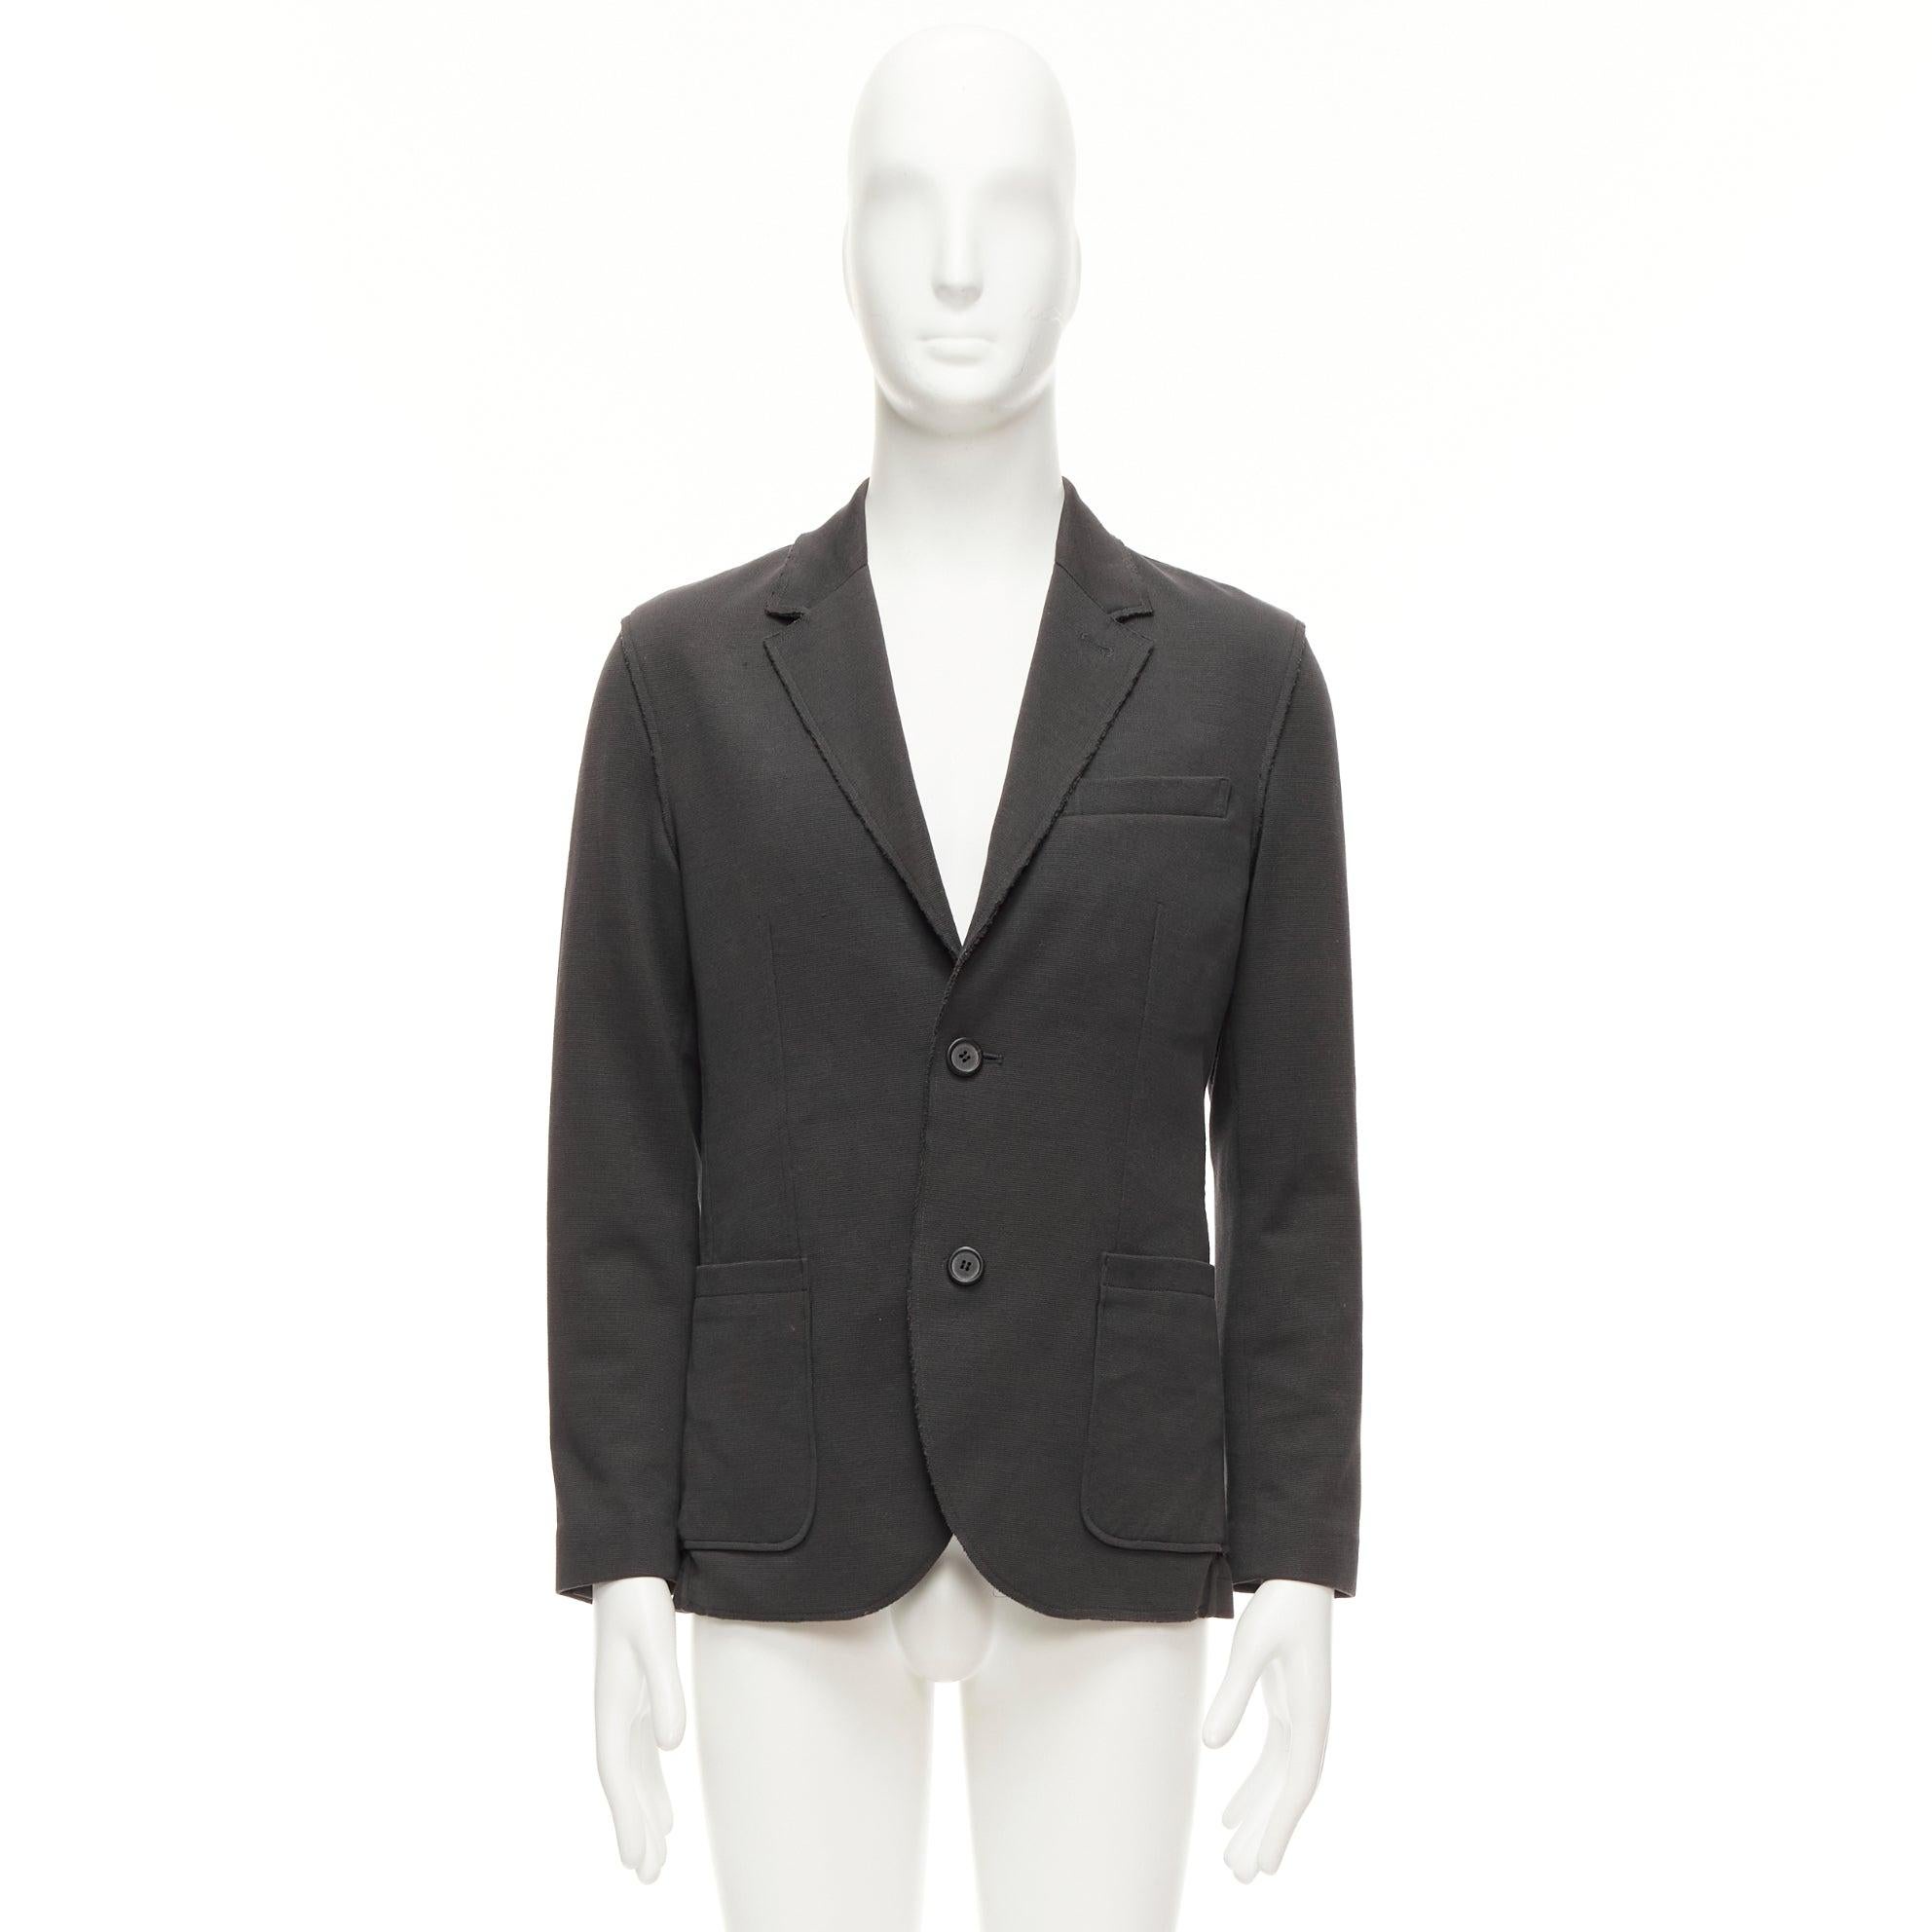 LANVIN grey cotton overtitched darts frayed edge pocketed blazer FR48 M
Reference: MLCO/A00007
Brand: Lanvin
Designer: Alber Elbaz
Material: Cotton
Color: Grey
Pattern: Solid
Closure: Button
Lining: Grey Fabric
Extra Details: Frayed edge